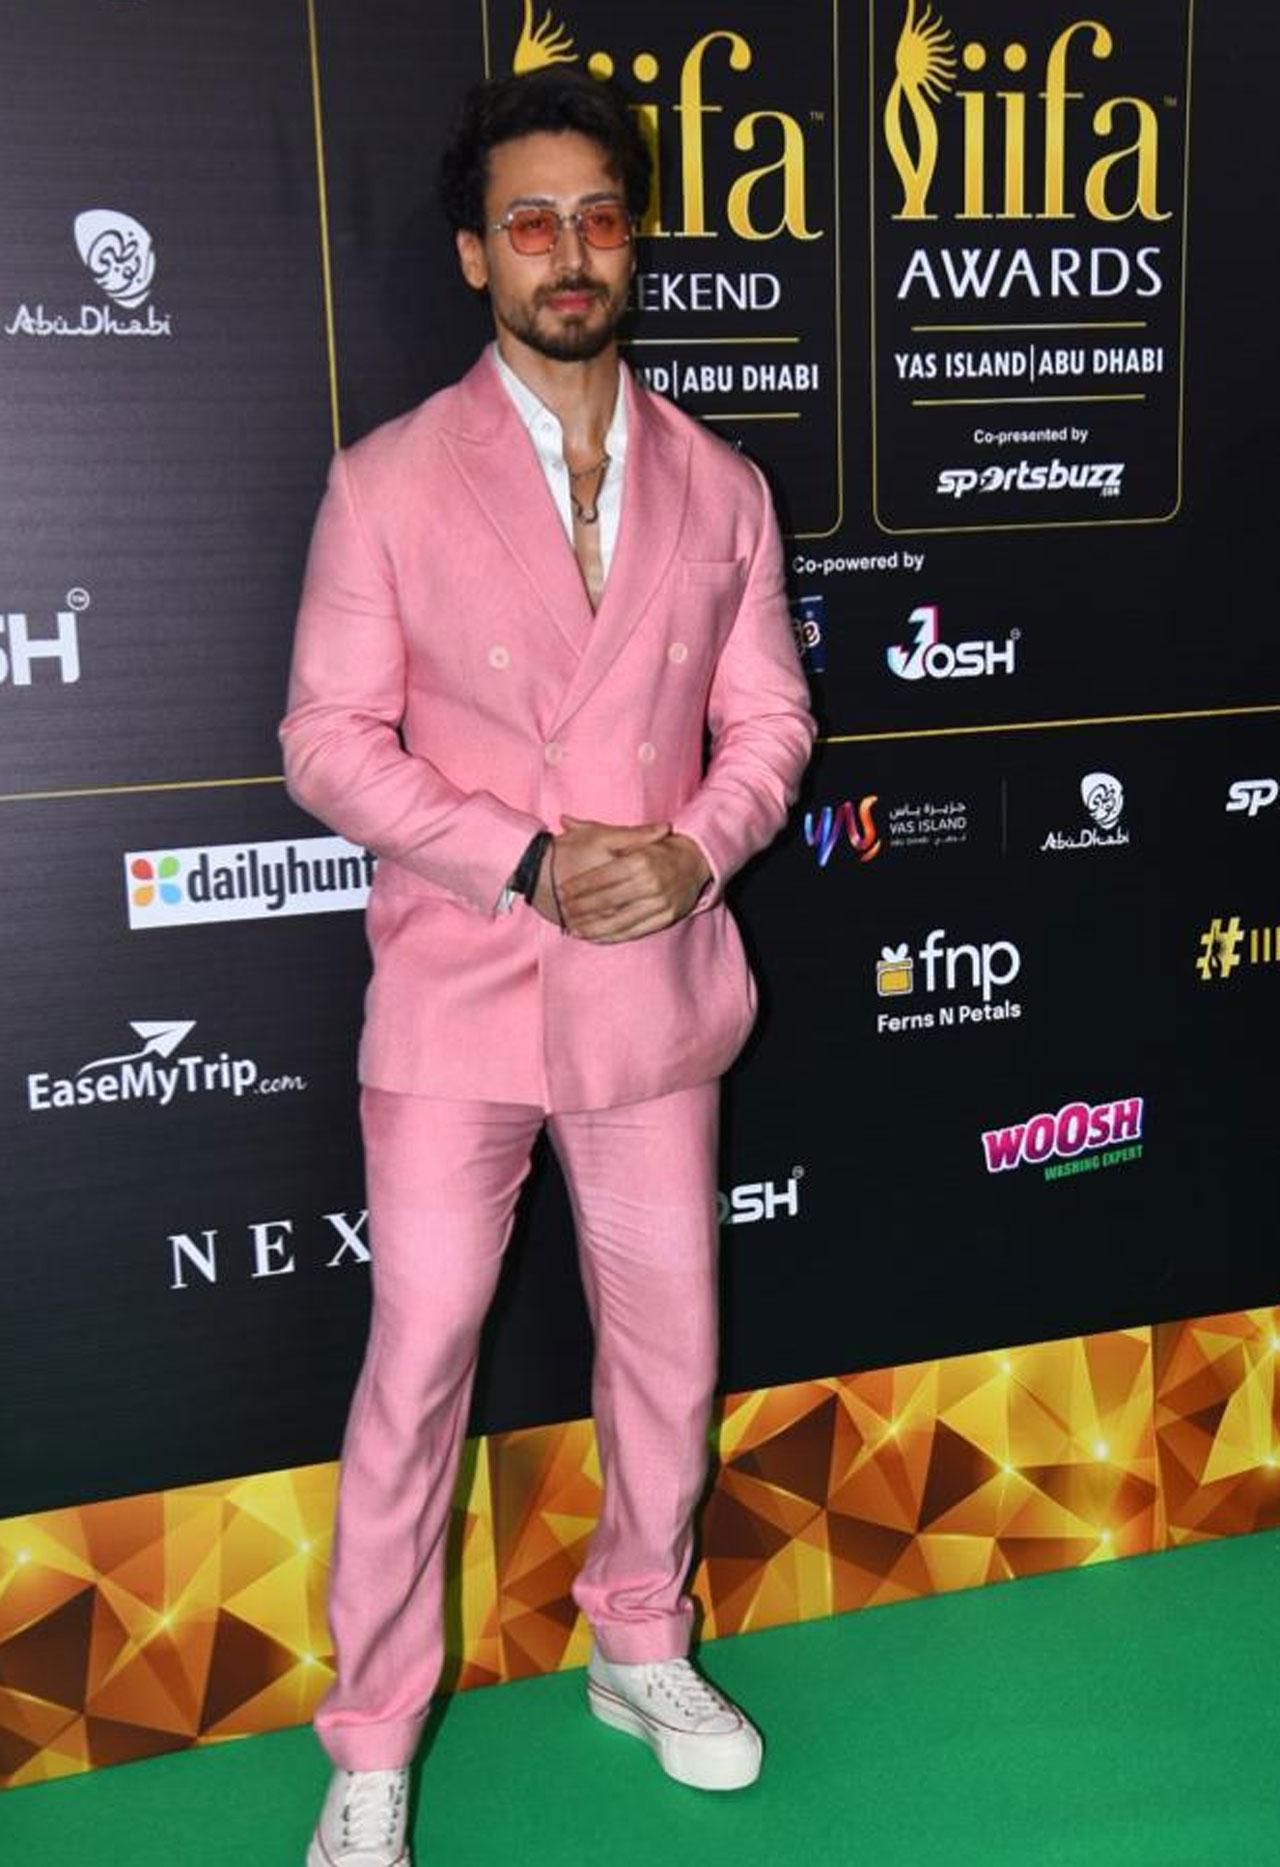 Tiger Shroff carried a pink suit with Elan and grace. He too is going to be performing at the main event